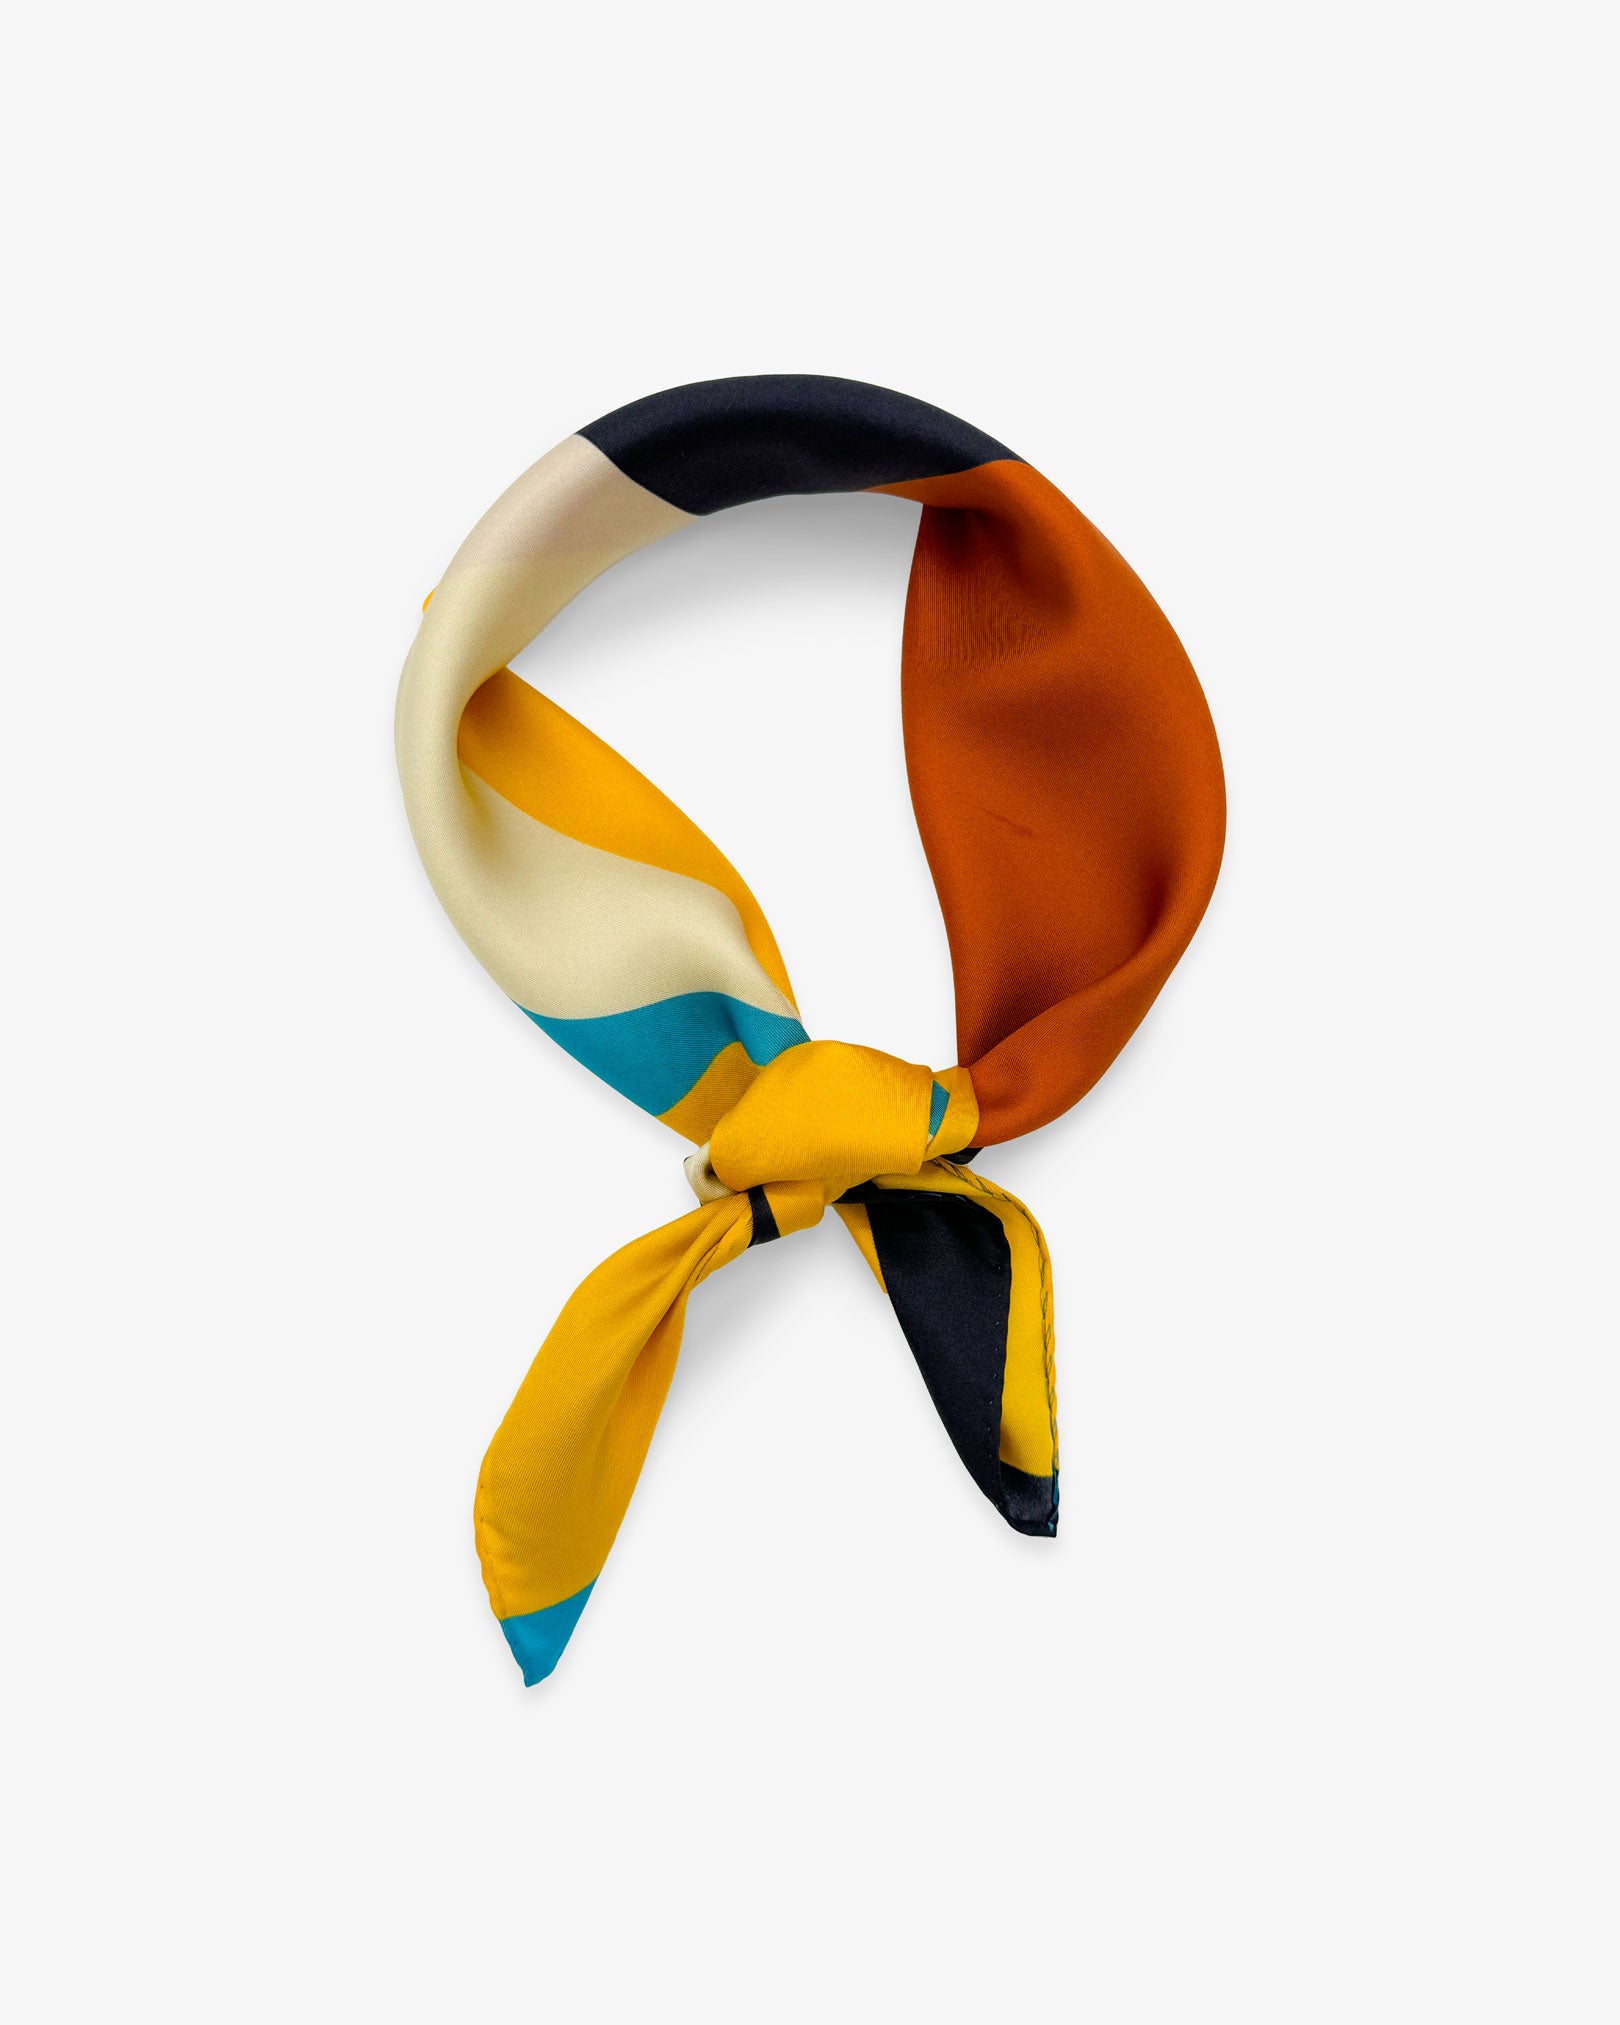 The 'Weimar' Bauhaus-inspired silk neckerchief knotted and looped against a white background.